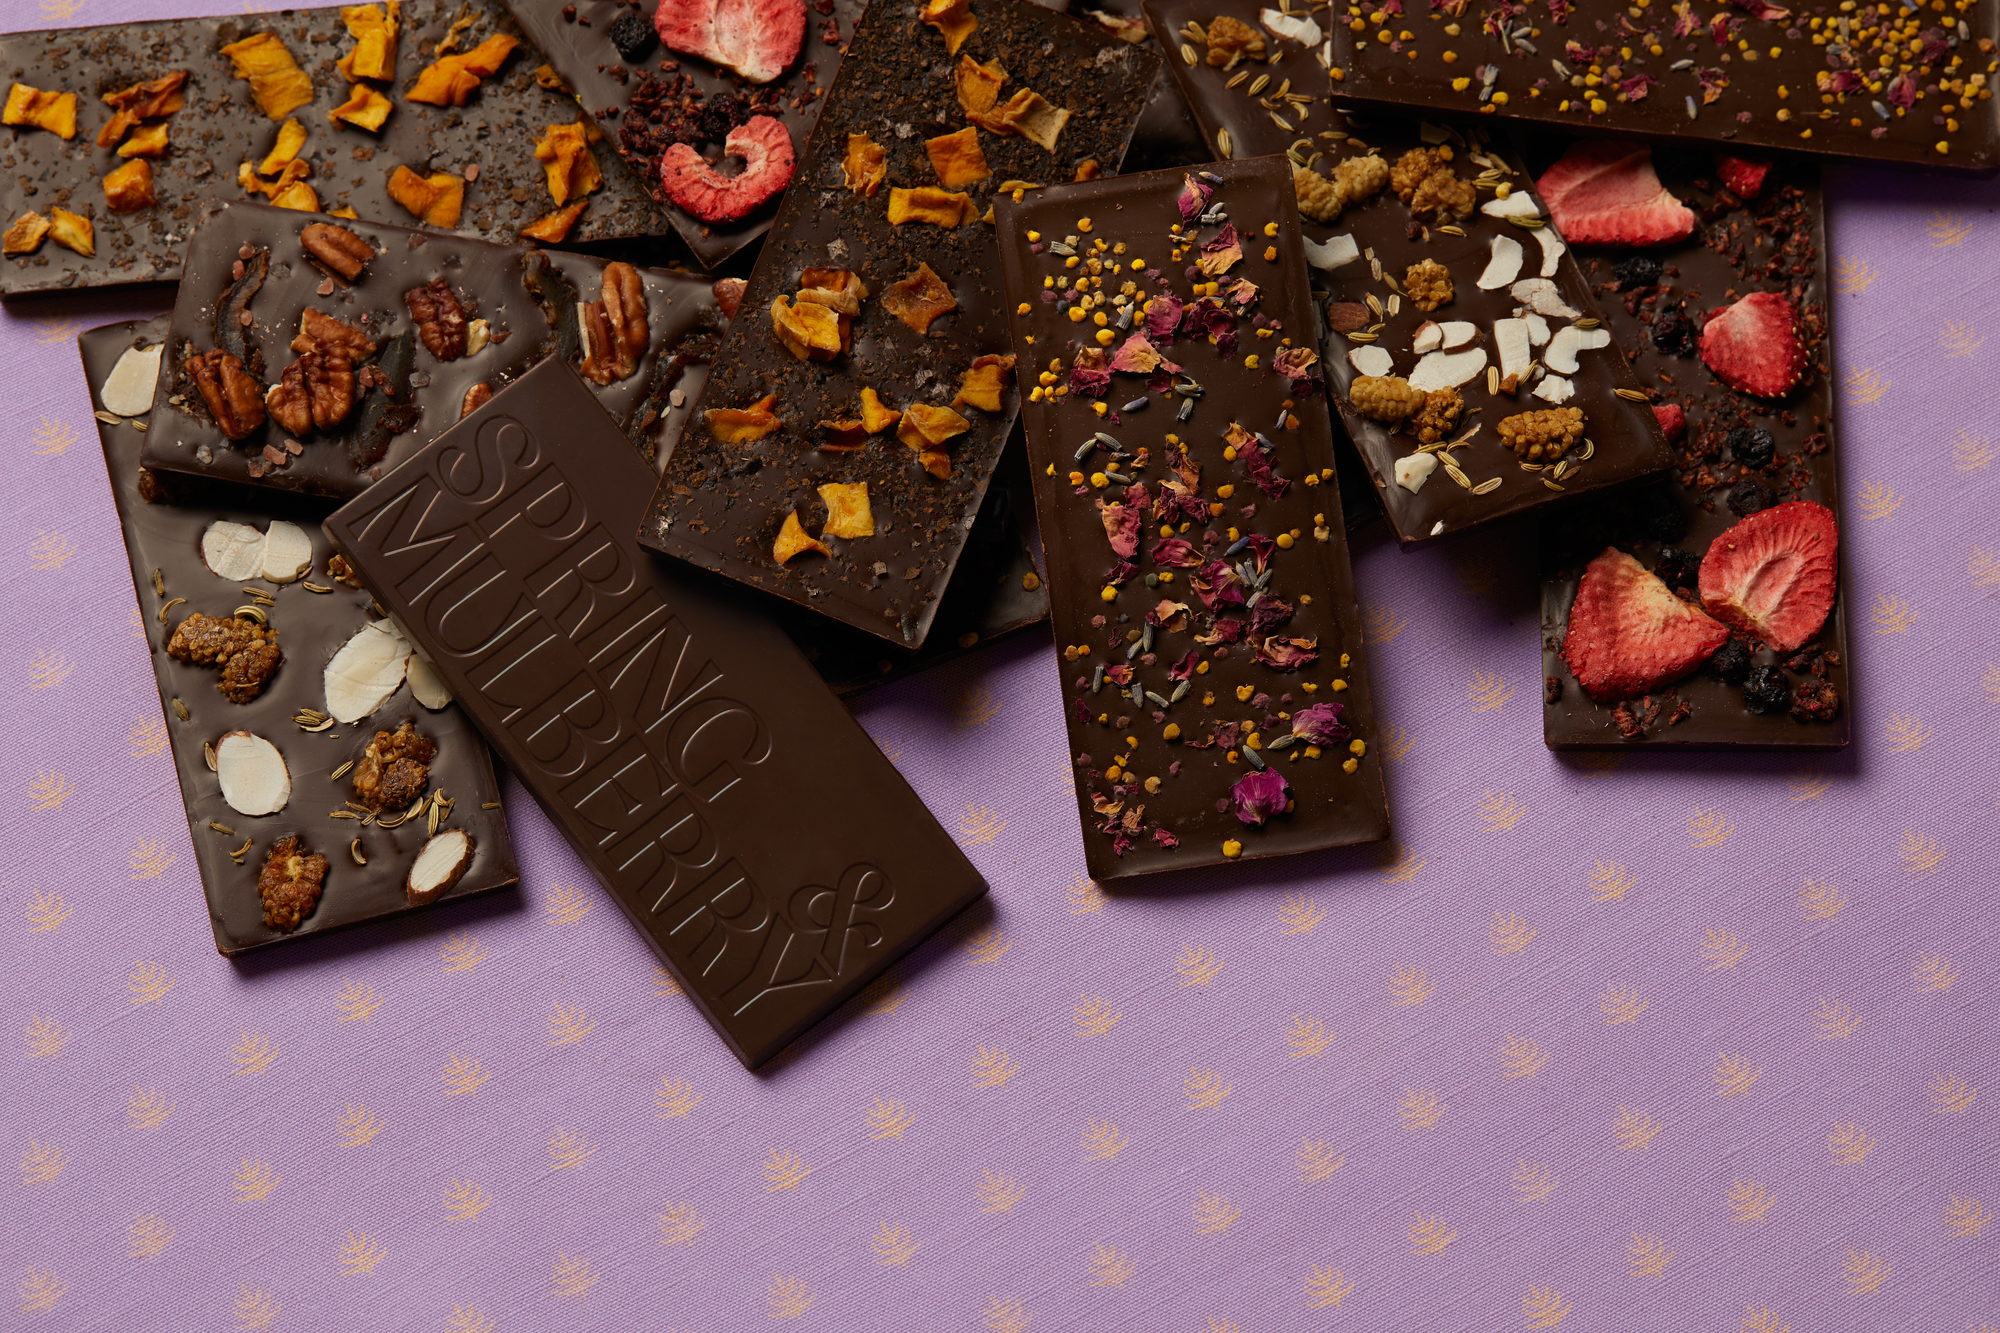 Five Spring & Mulberry date-sweetened chocolate bar boxes lay askew on a holiday table with oysters and fruit.